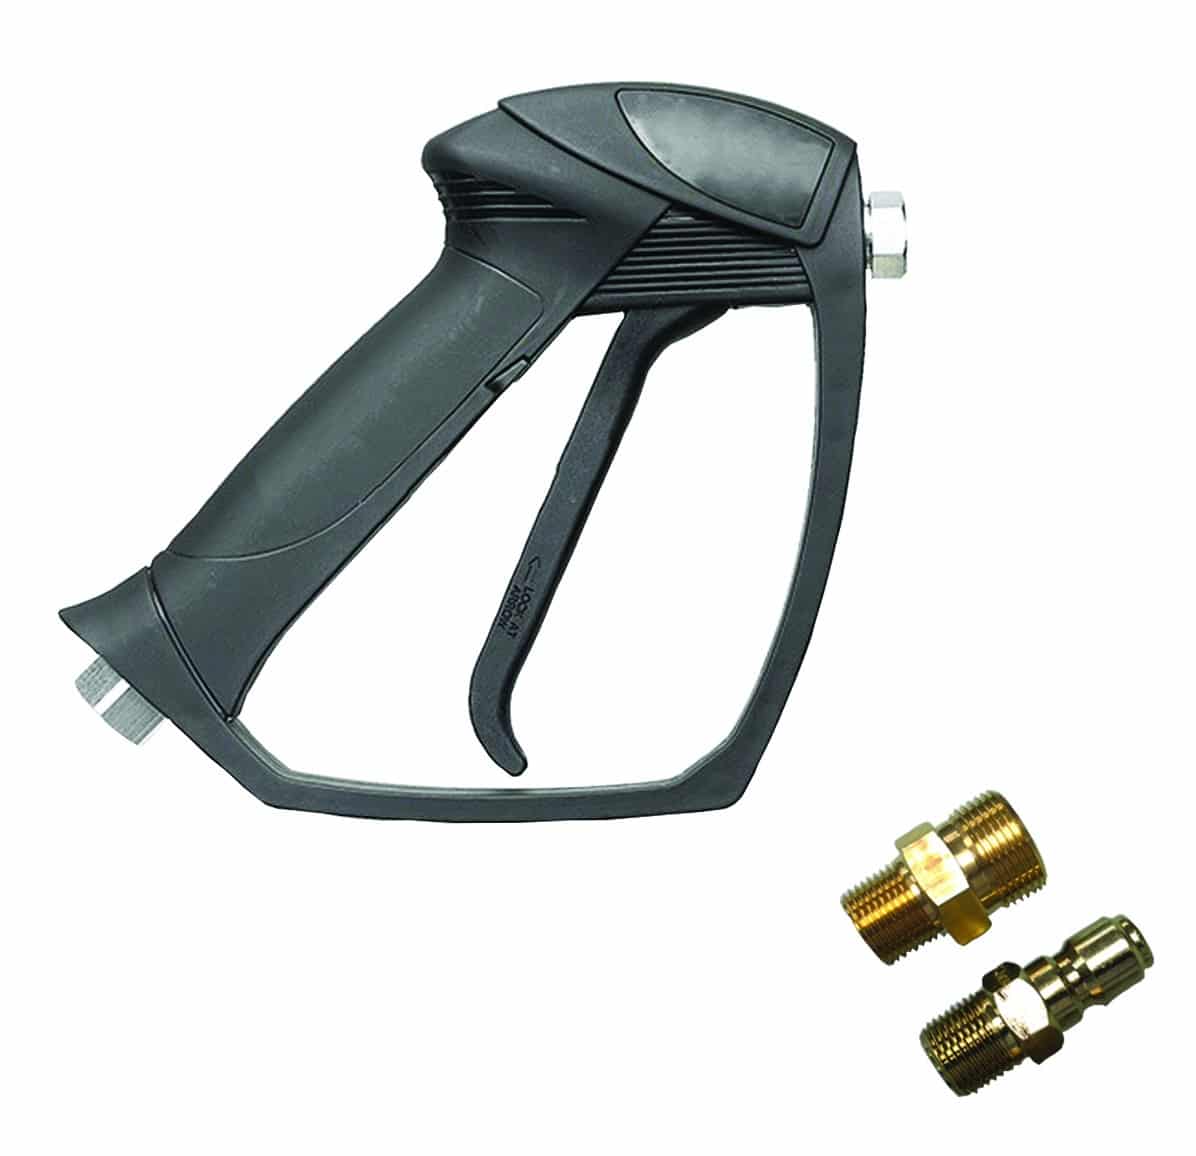 Simpson Gun Handle with adapters